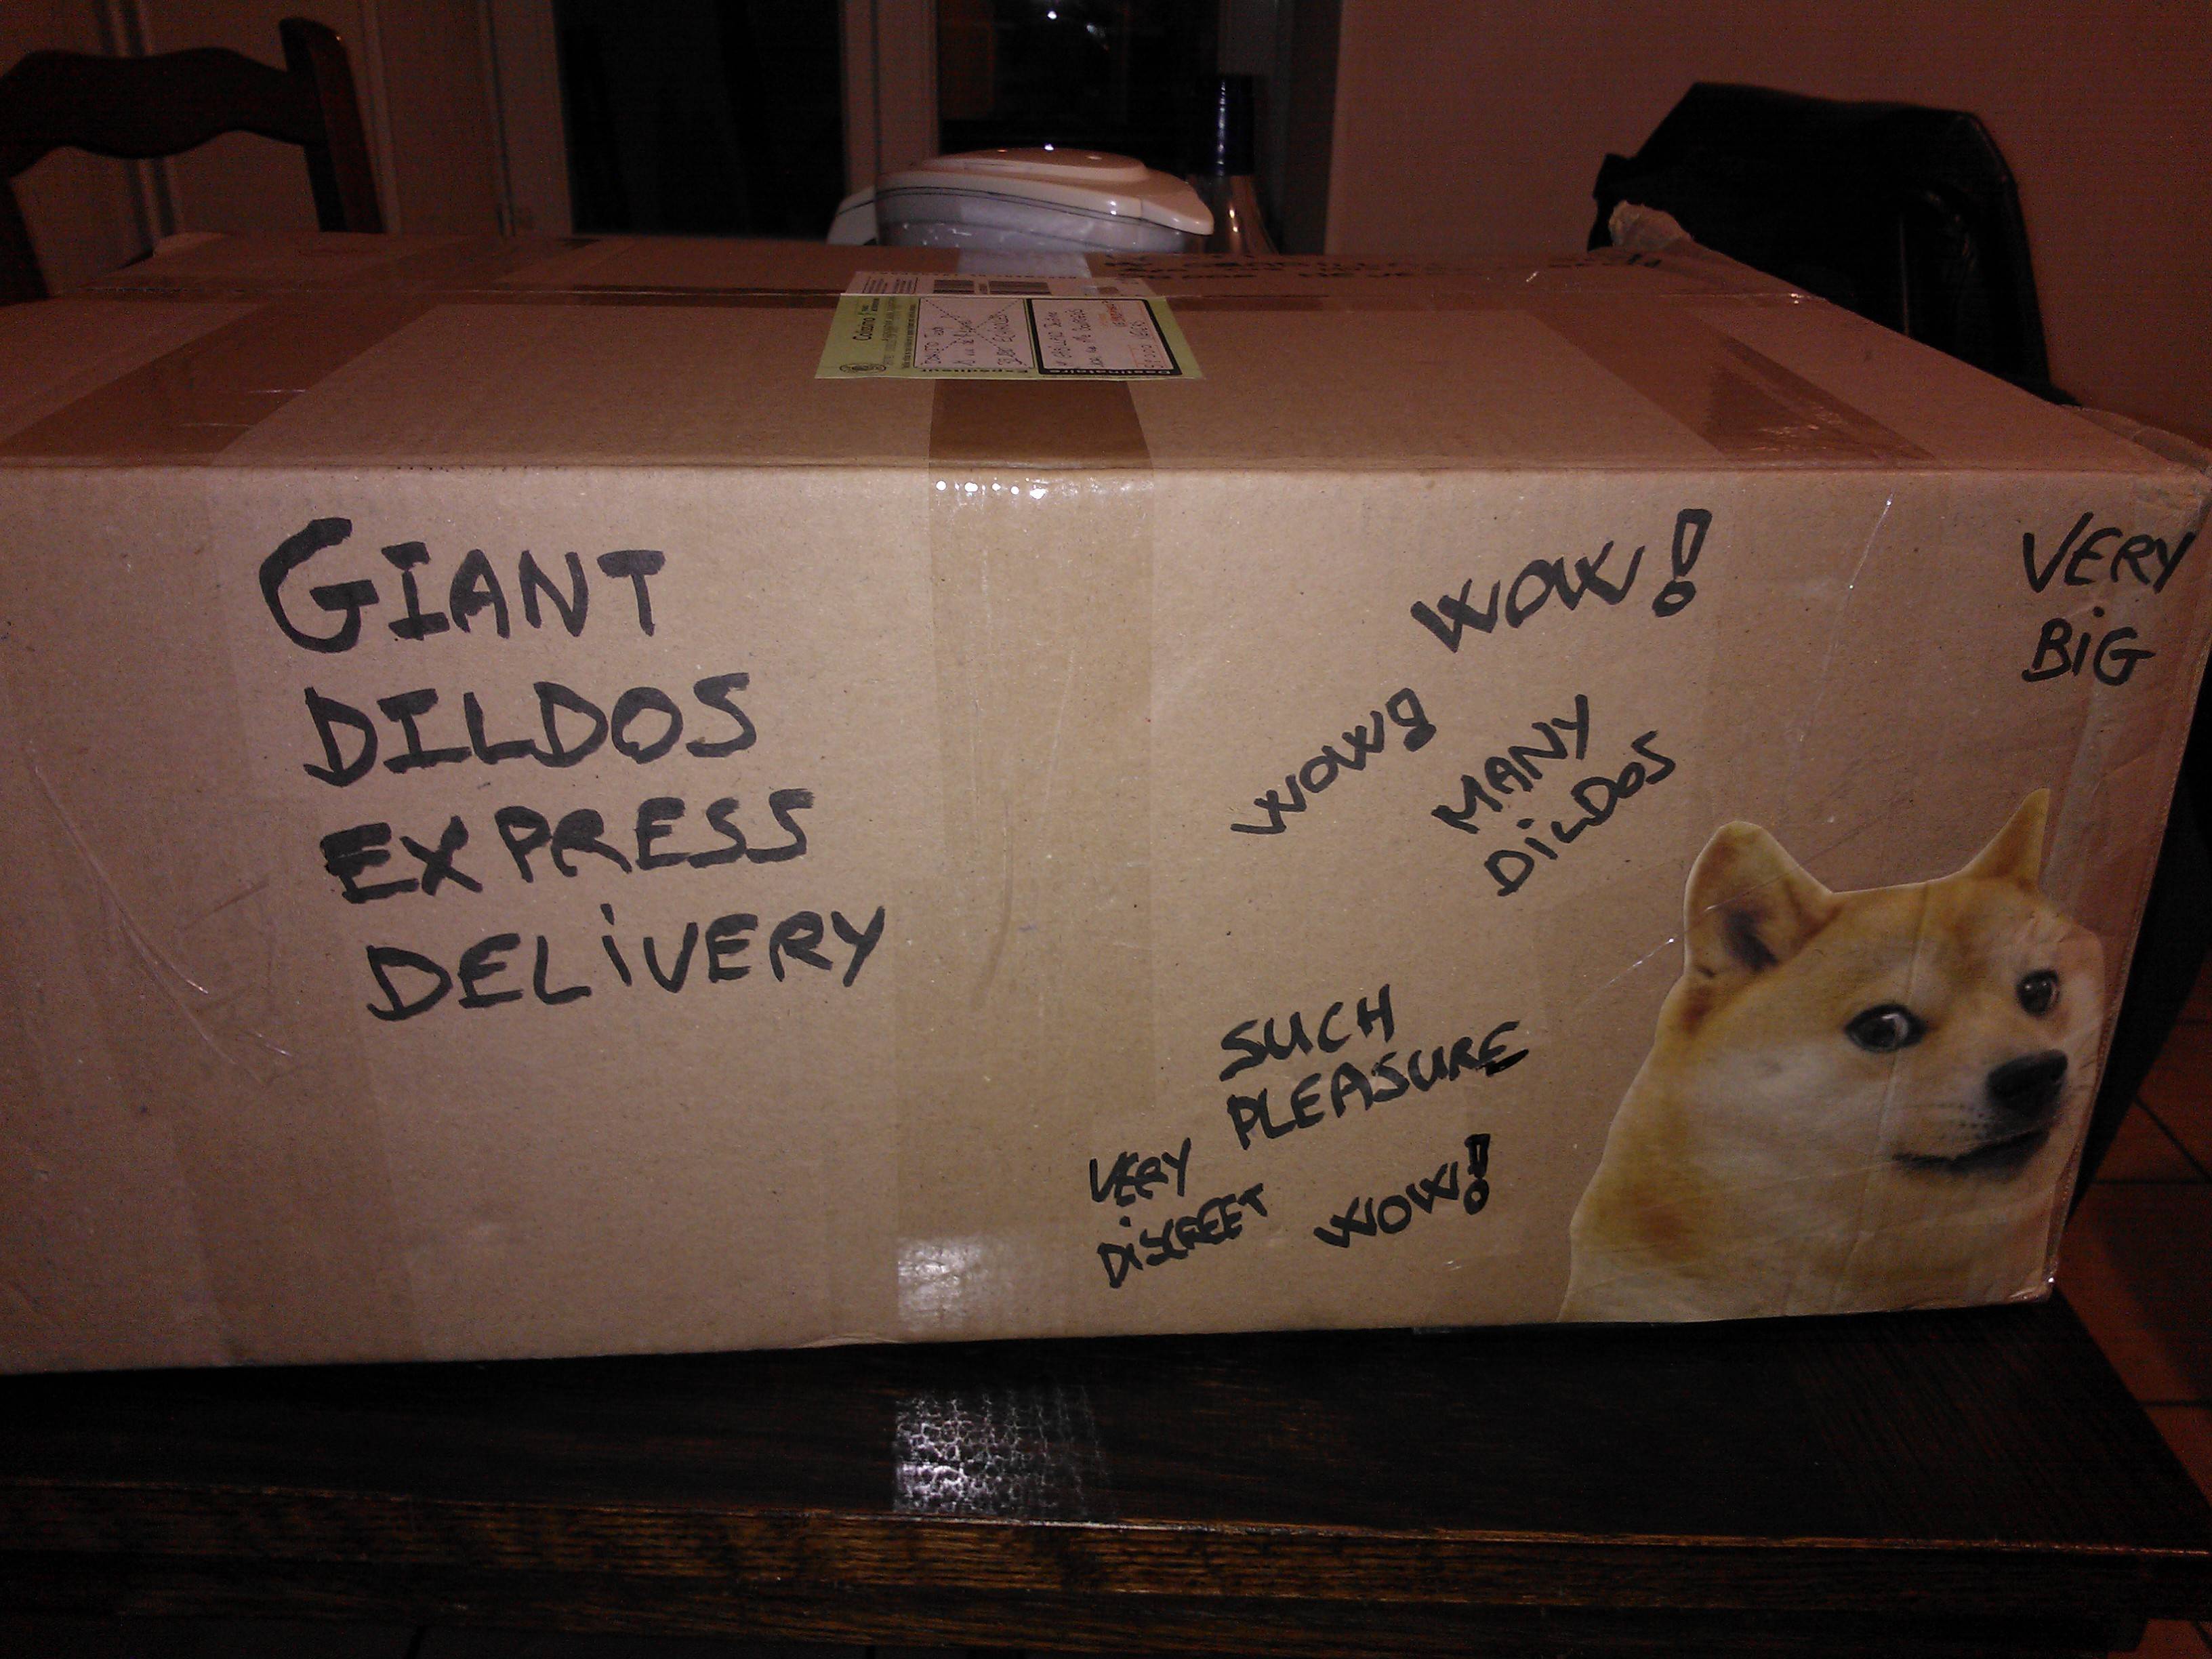 doge dildos - Very Big Giant Dildos Express Wo wowg Woo Many Dildos Deliver...